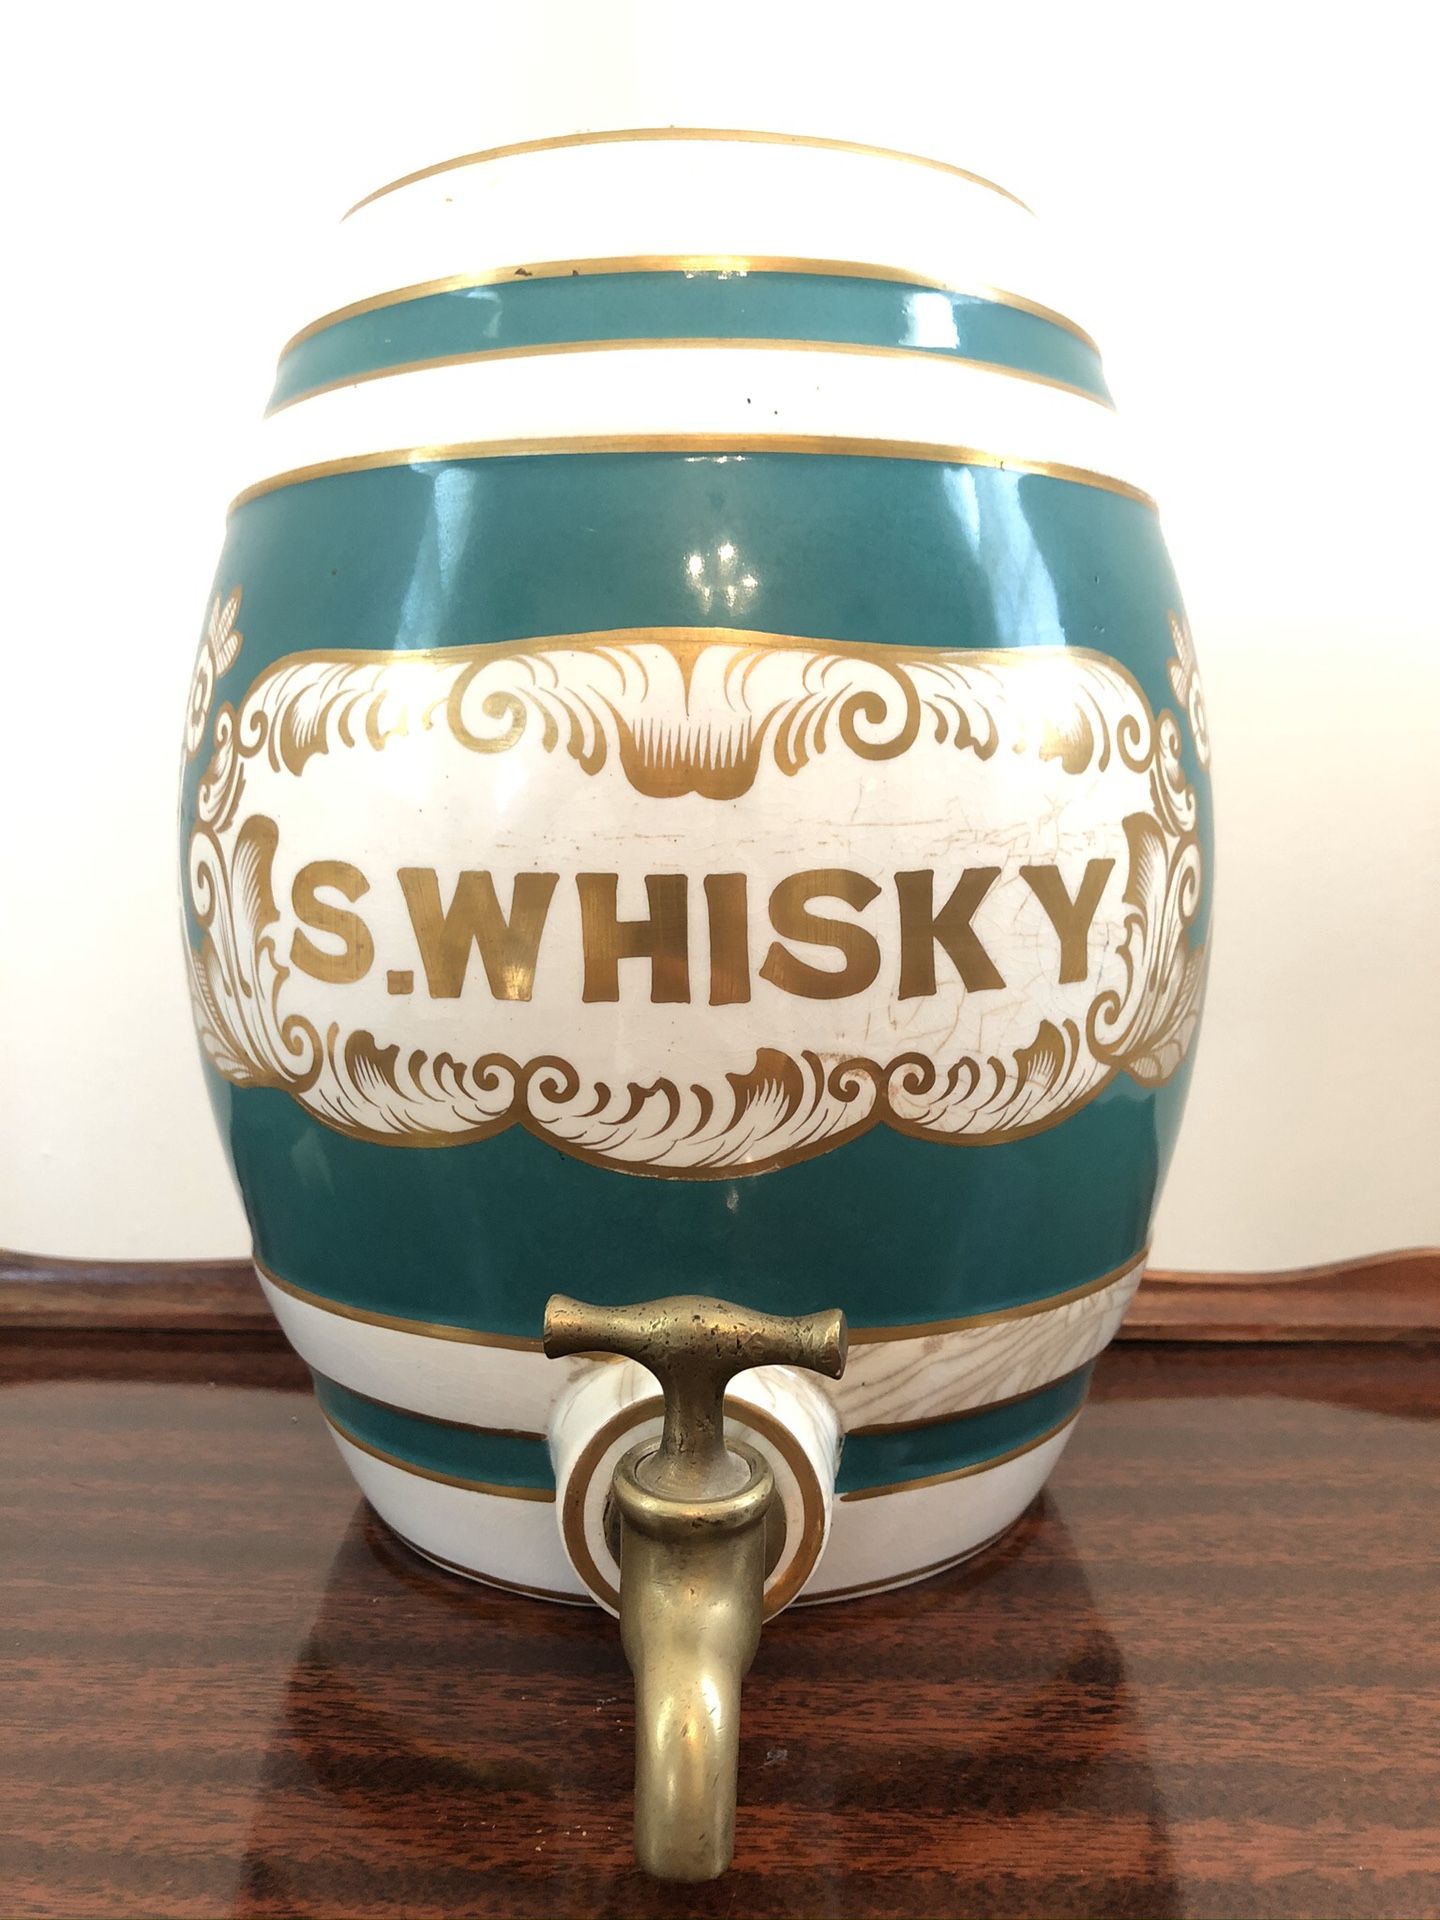 Scotch Whiskey Keg Barrel - 19th Century - Vintage Antique S. Whisky Ceramic Ceramic Keg Barrel Jug with Pour Spout - Teal Green and Gold